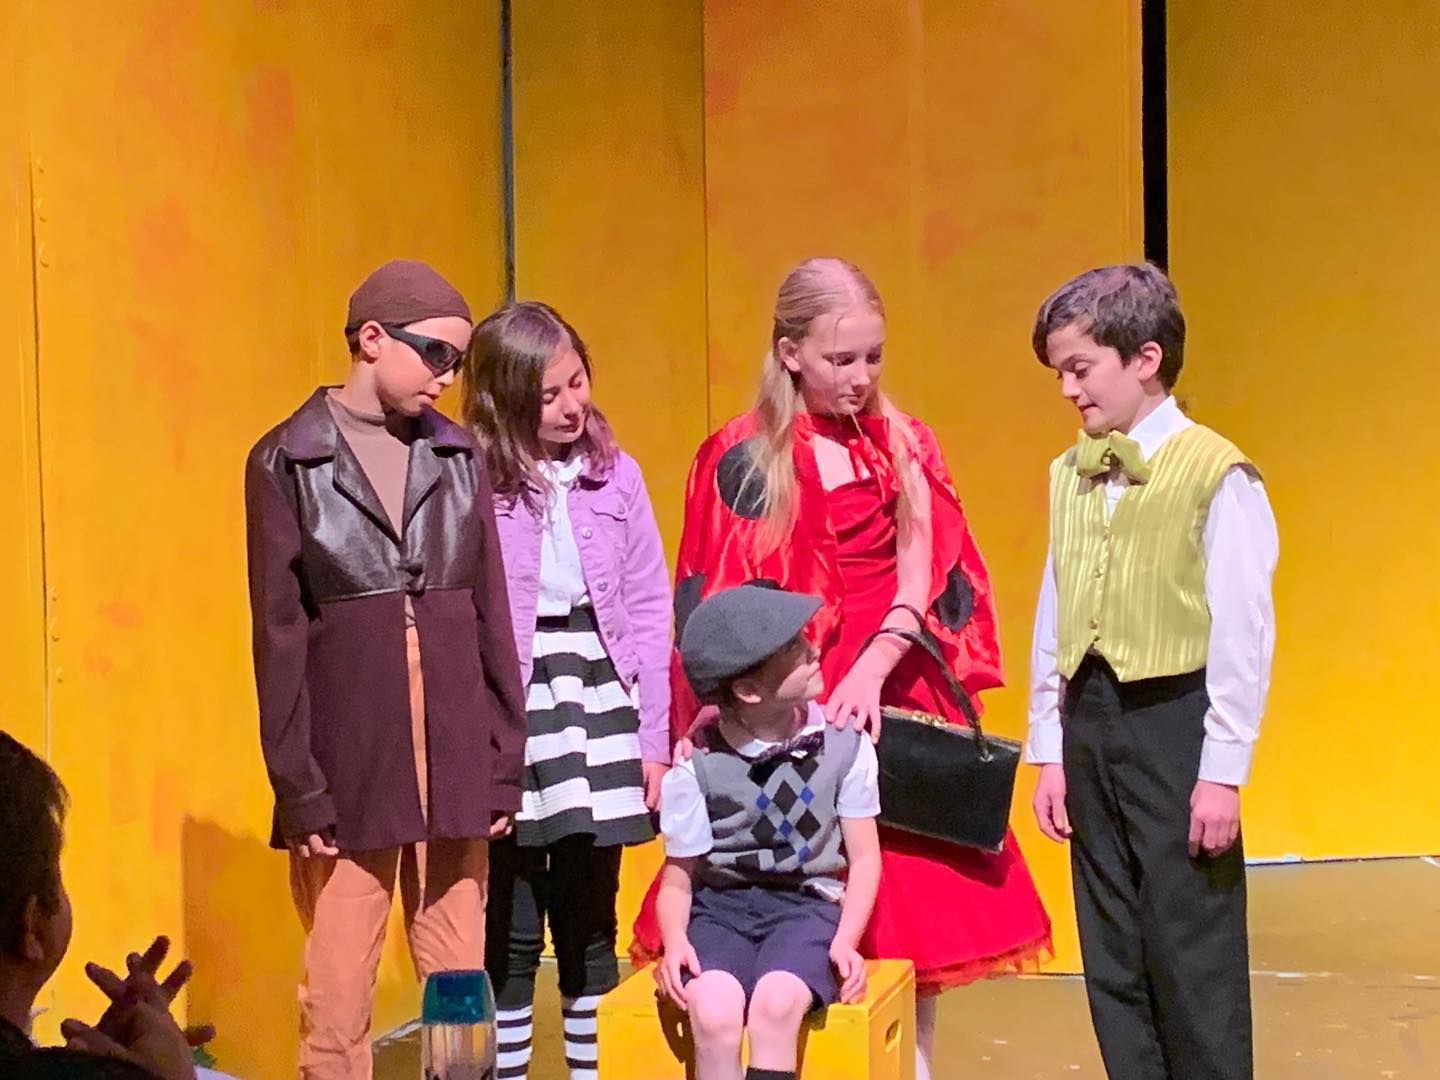 PHOTO: provided by YST | The South Pasadenan | YST's production of James and the Giant Peach Jr.